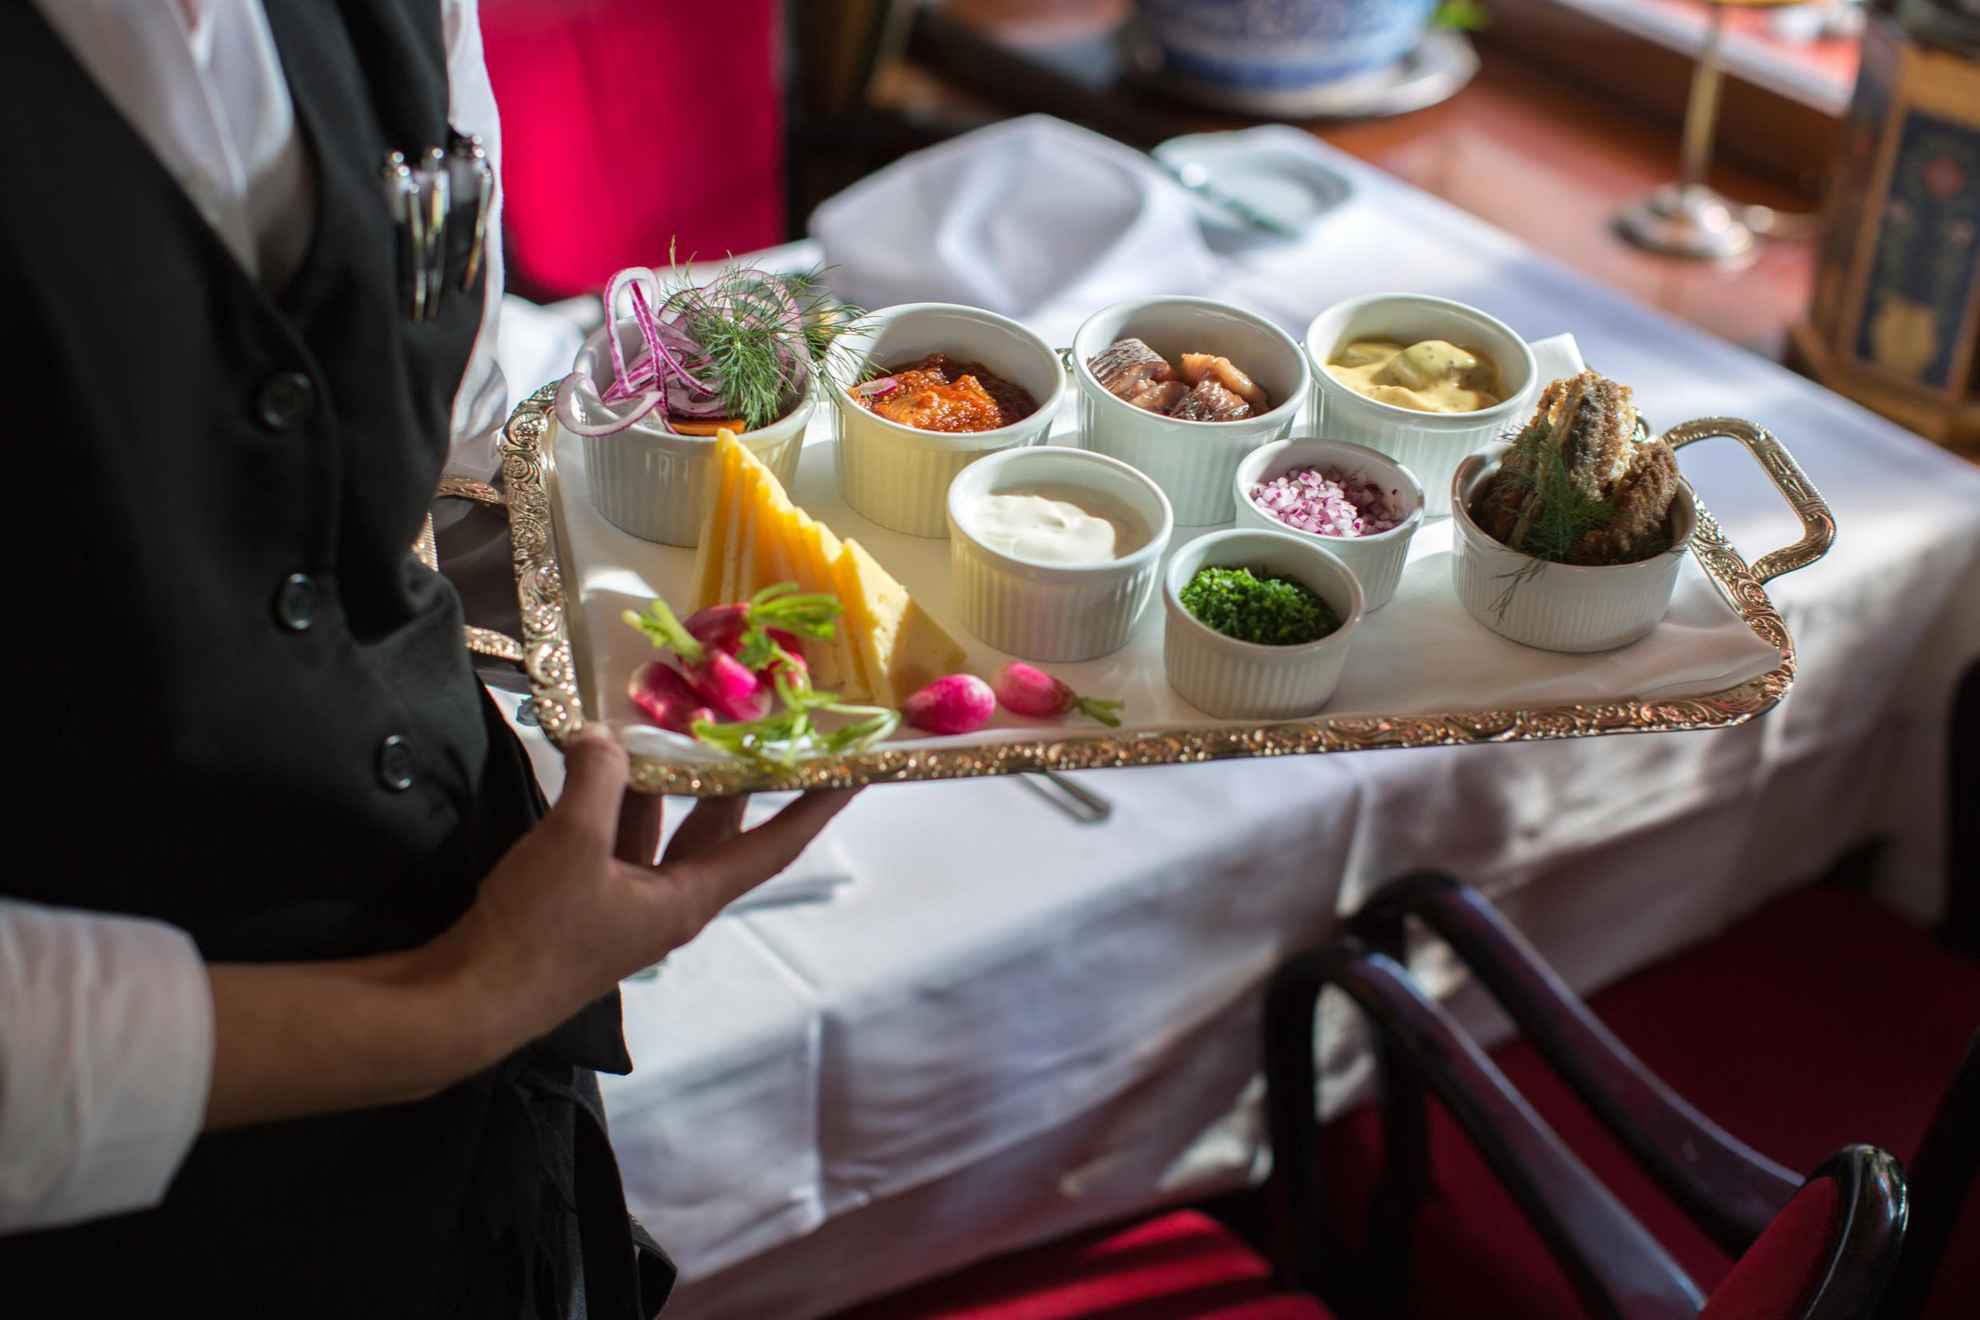 A waiter holds a tray with small bowls of chive, red onion, sour cream and herring.